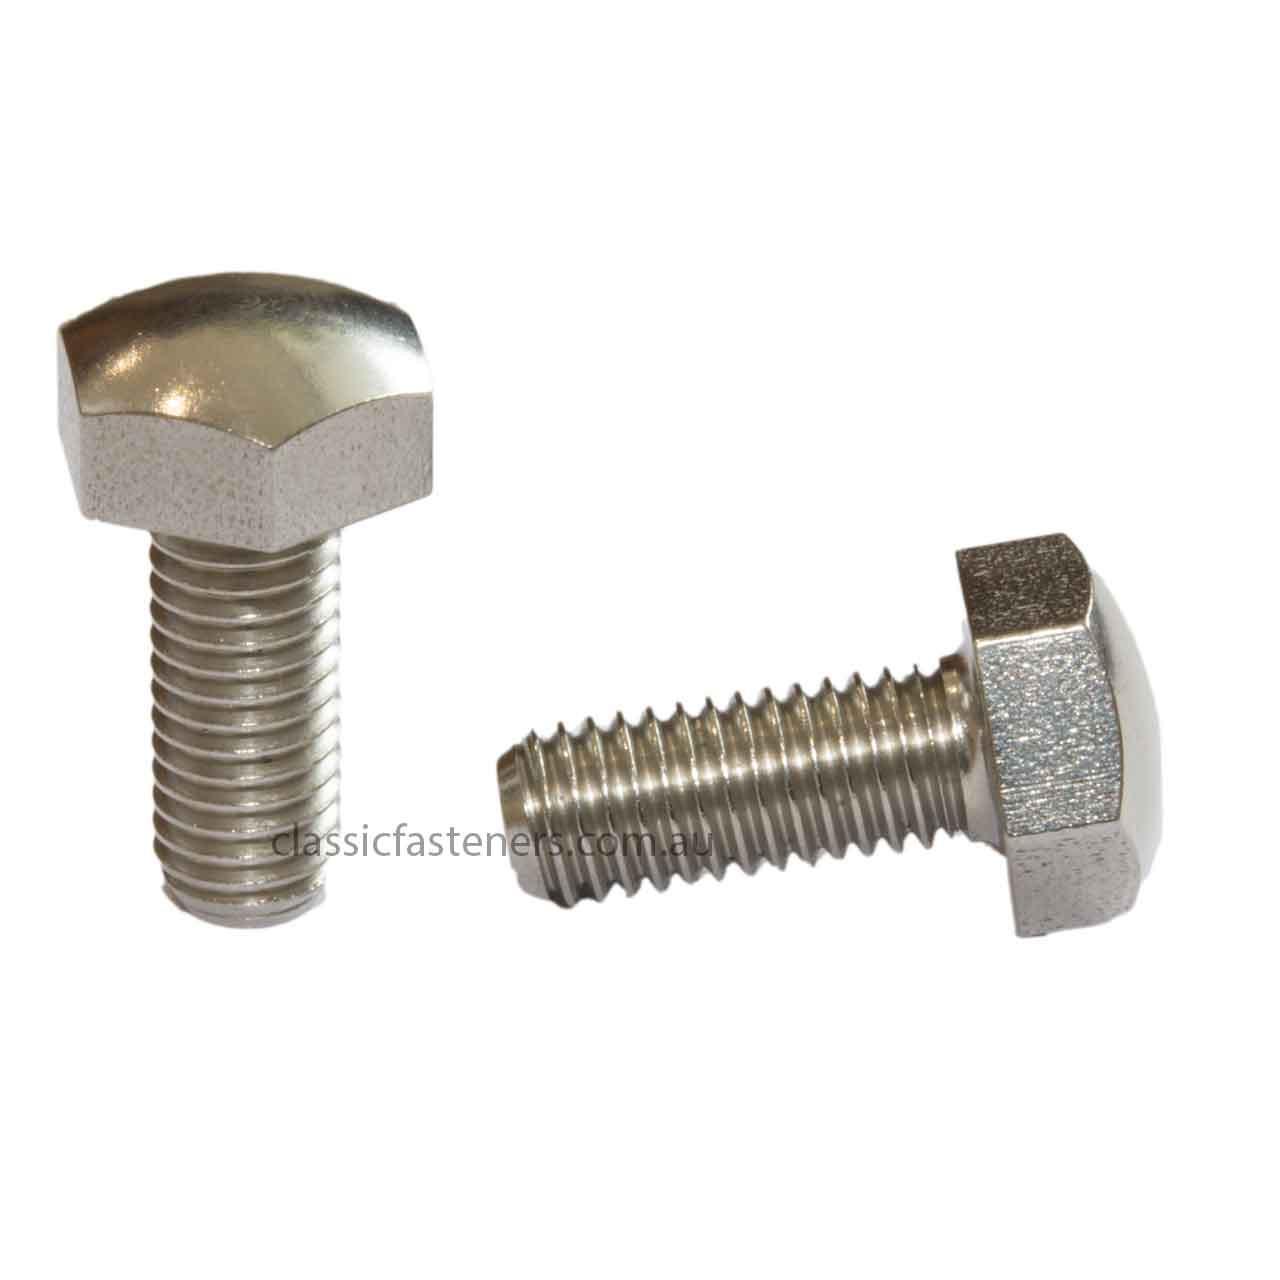 1/4 BSF x 5/8 Domed Head Stainless Set Screw 